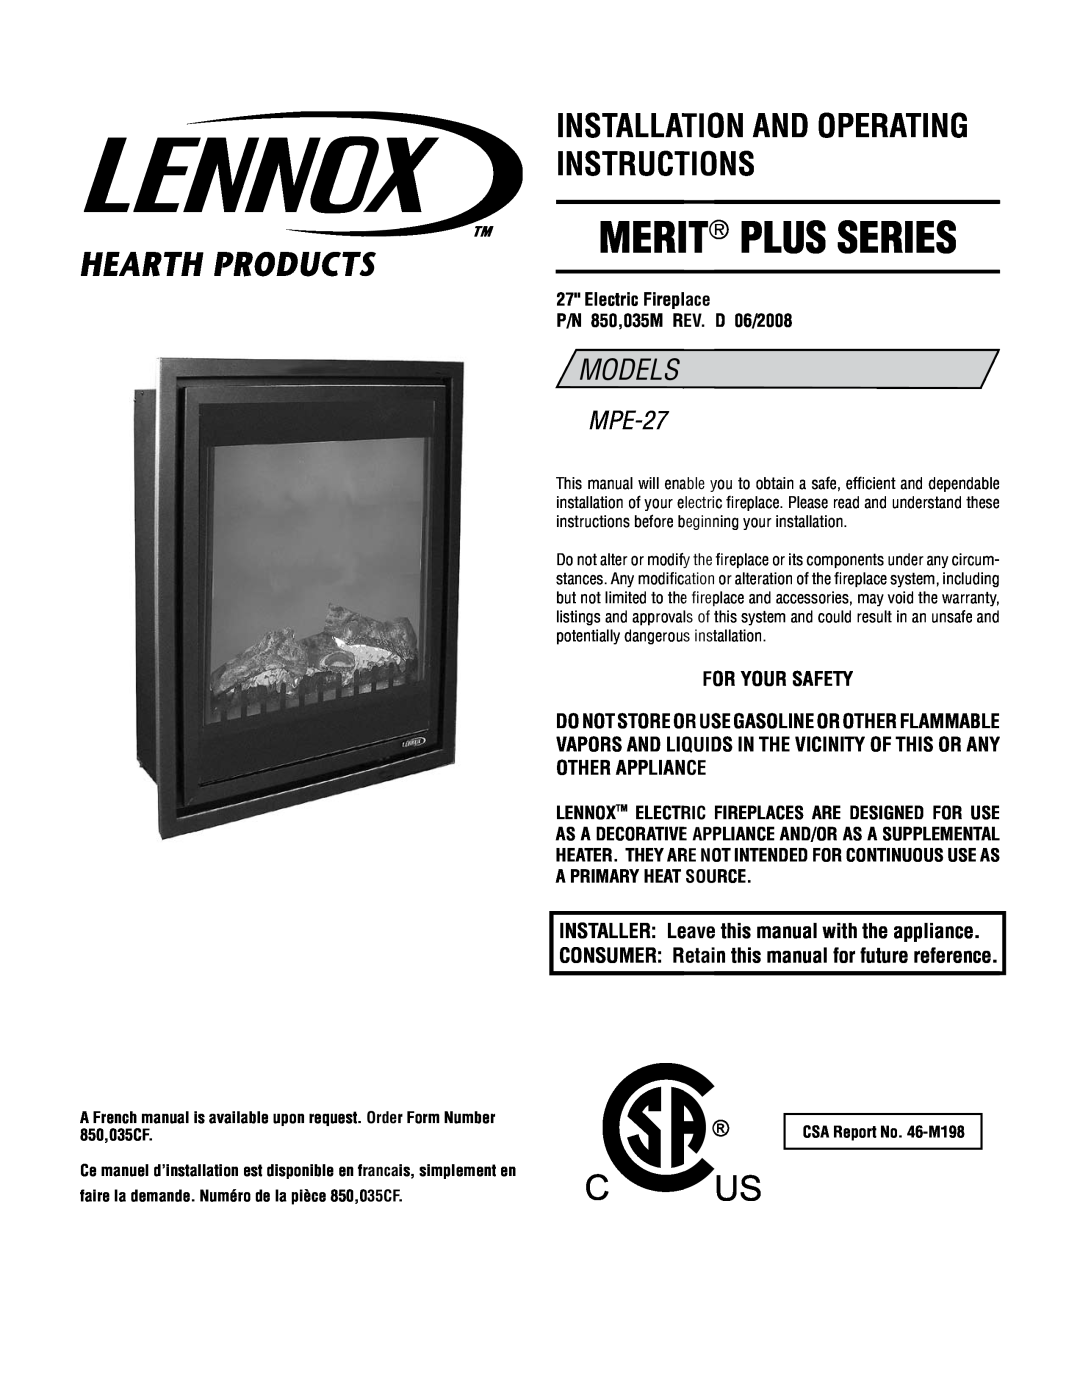 Lennox Hearth MPE-27 warranty For your safety, INSTALLER Leave this manual with the appliance, Merit Plus Series, Models 